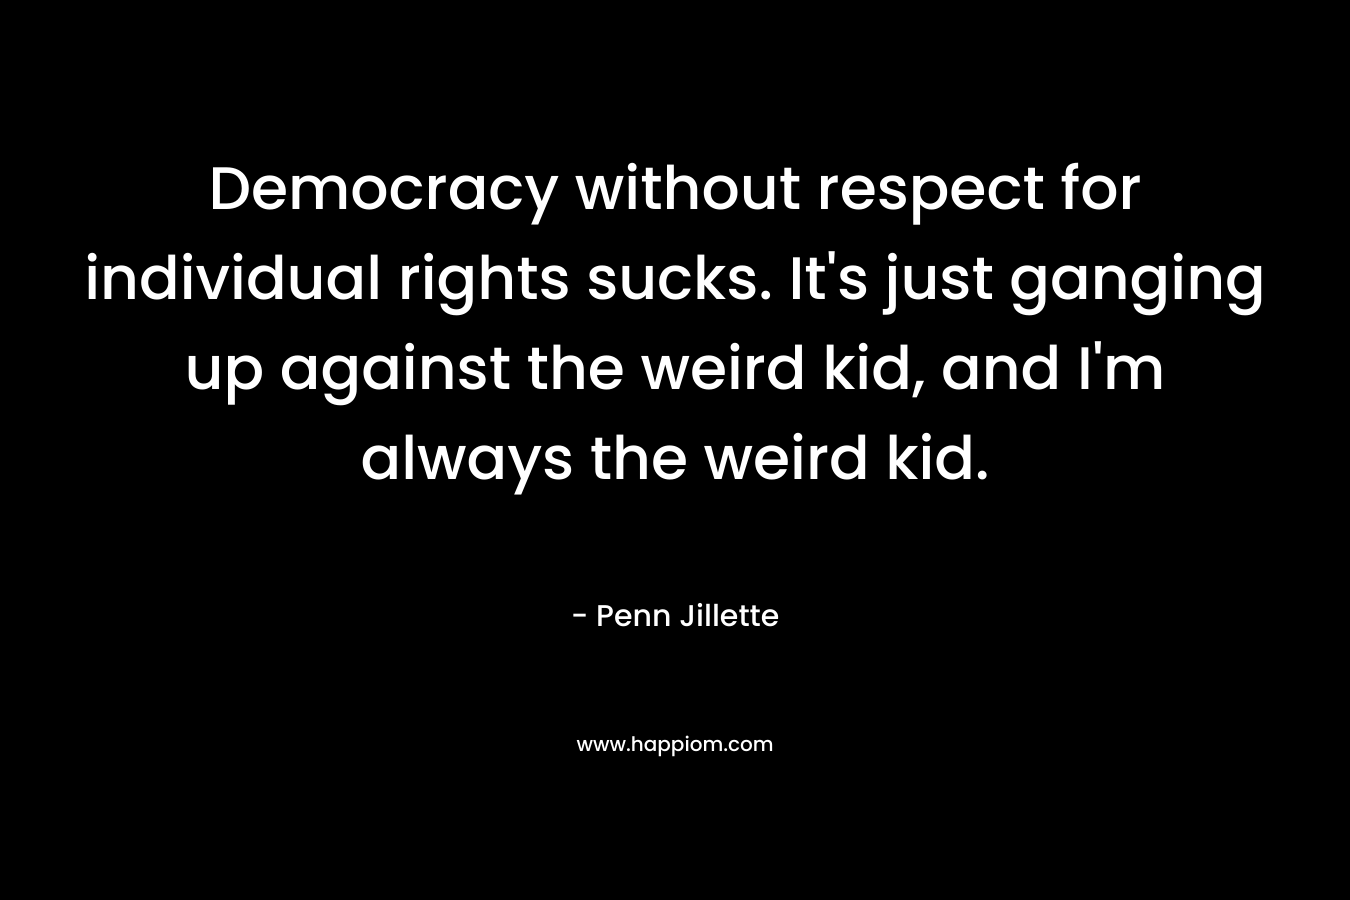 Democracy without respect for individual rights sucks. It’s just ganging up against the weird kid, and I’m always the weird kid. – Penn Jillette